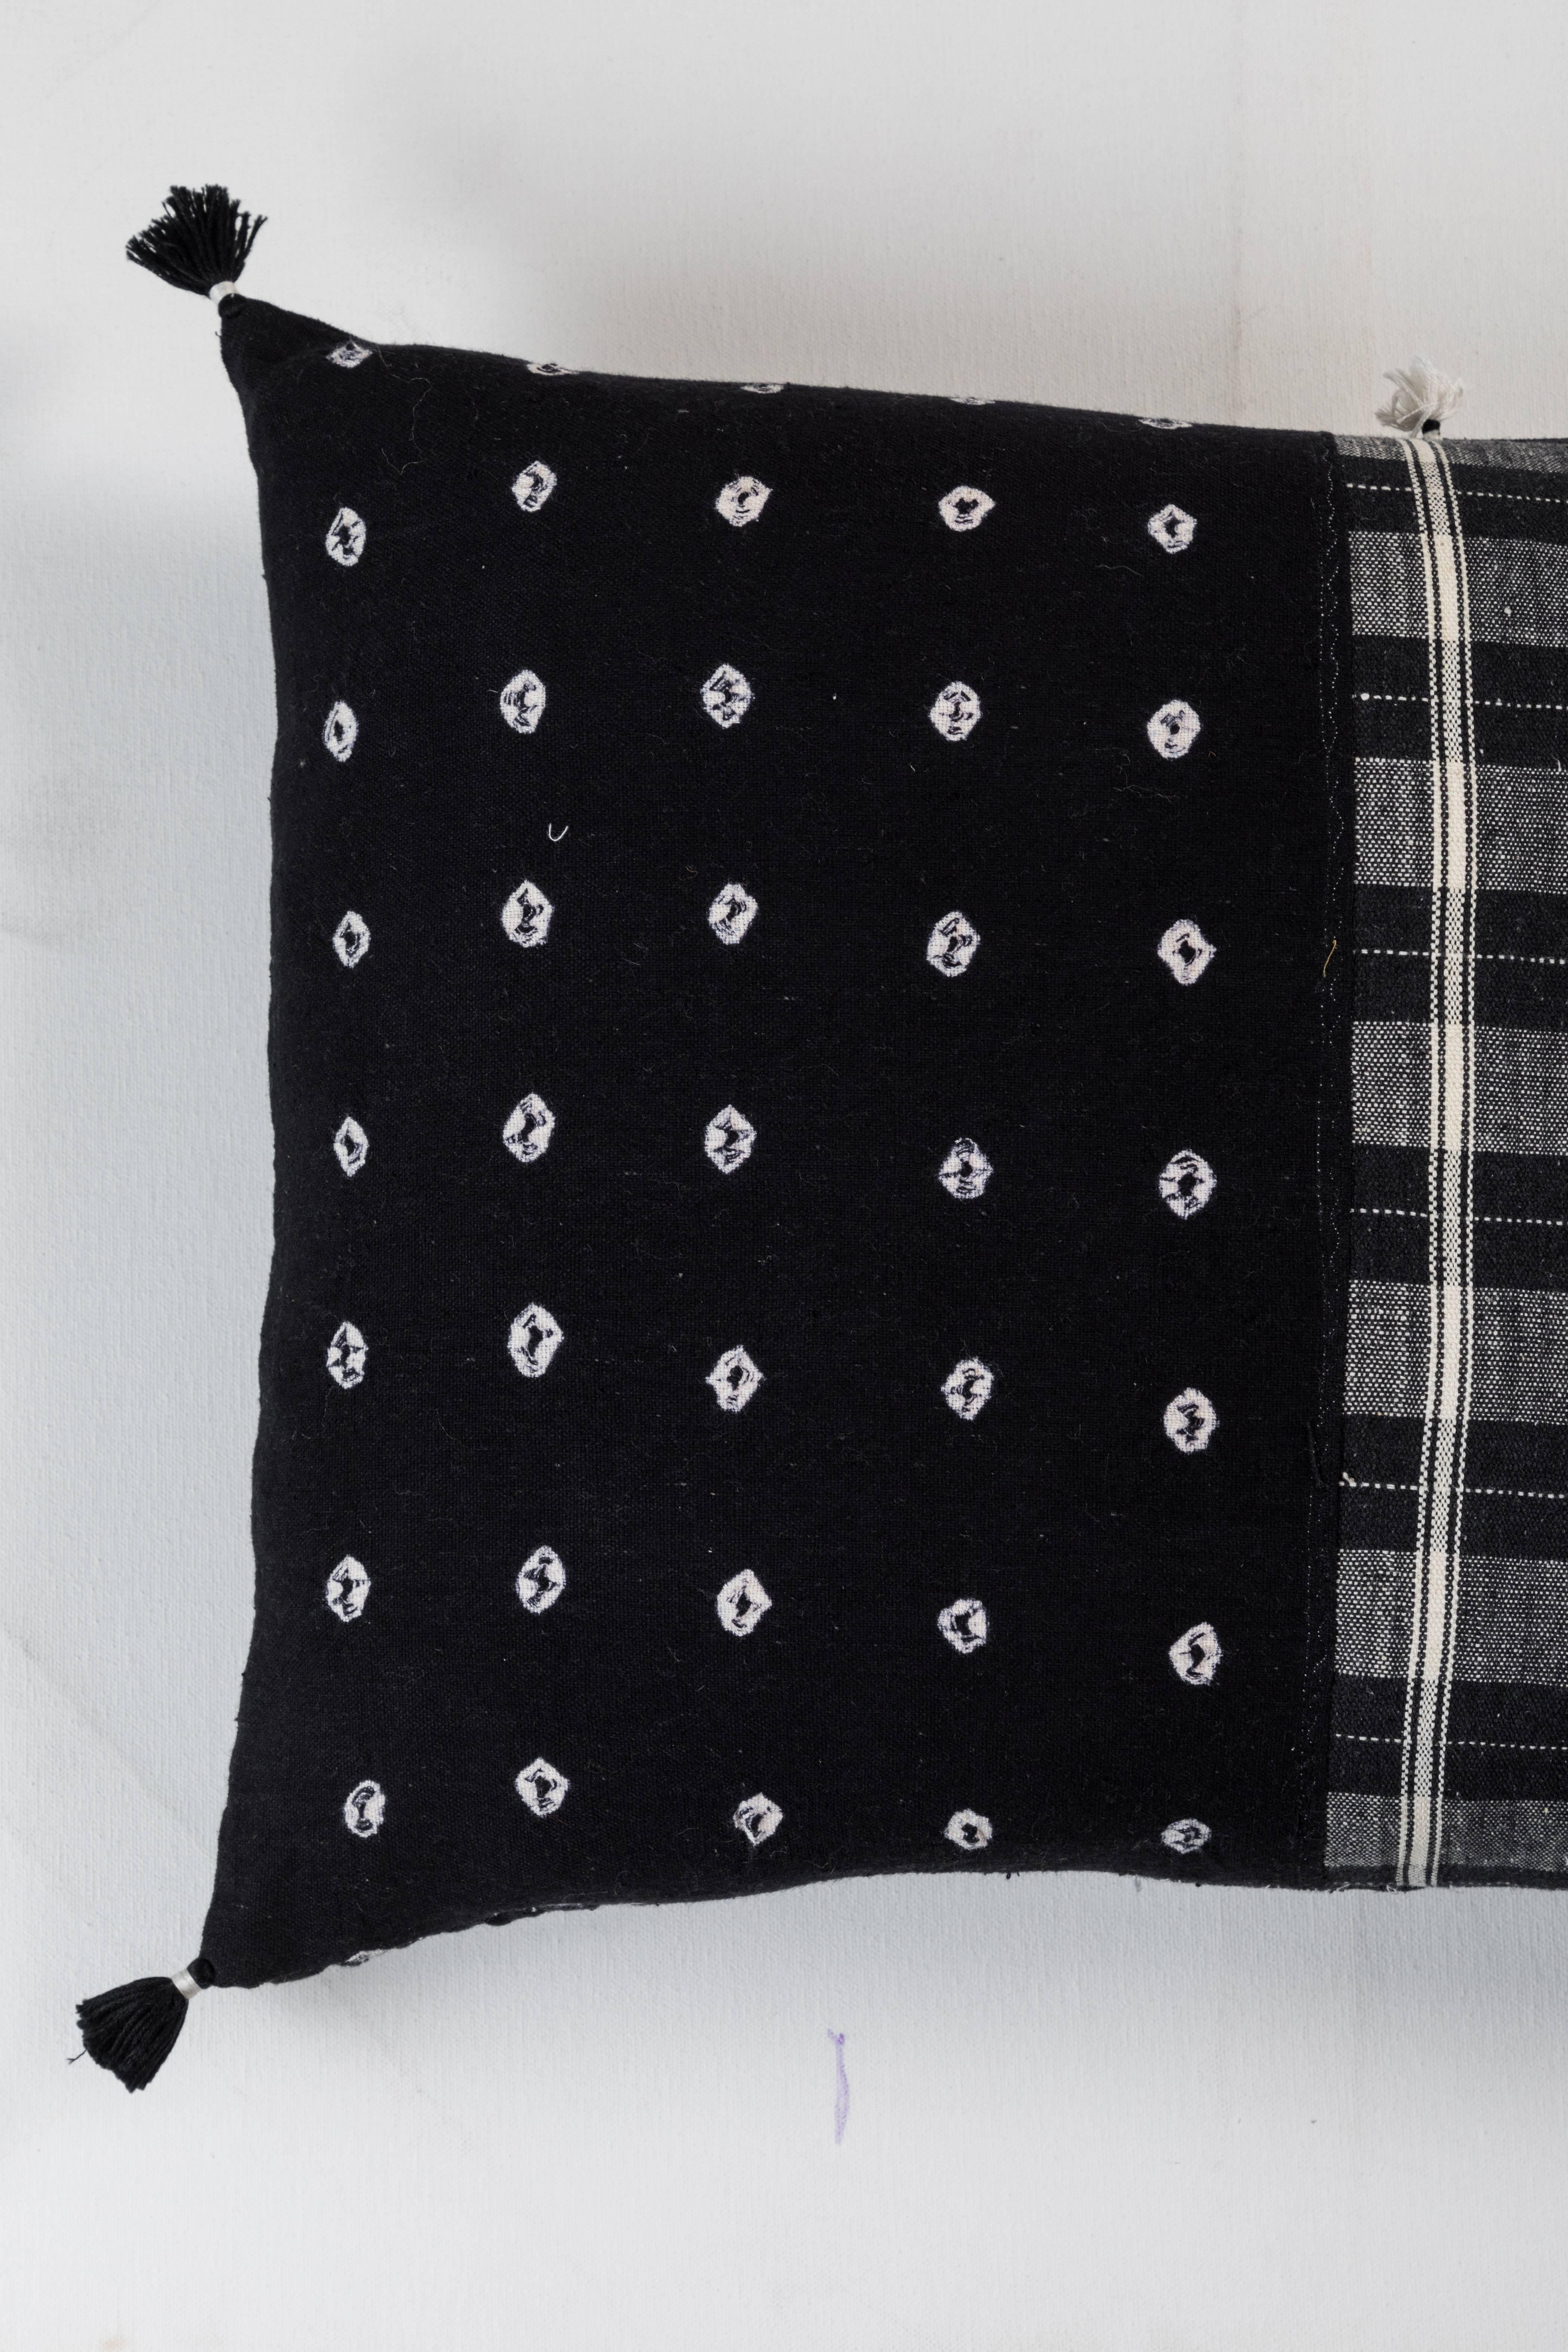 Kala naturally dyed organic cotton from Gujarat, India.  Hand-loomed using traditional Indian textile techniques to produce extra weft woven stripes and plaids.  This black and white pillow has added hand-knotted tassels. Areas of hand embroidery